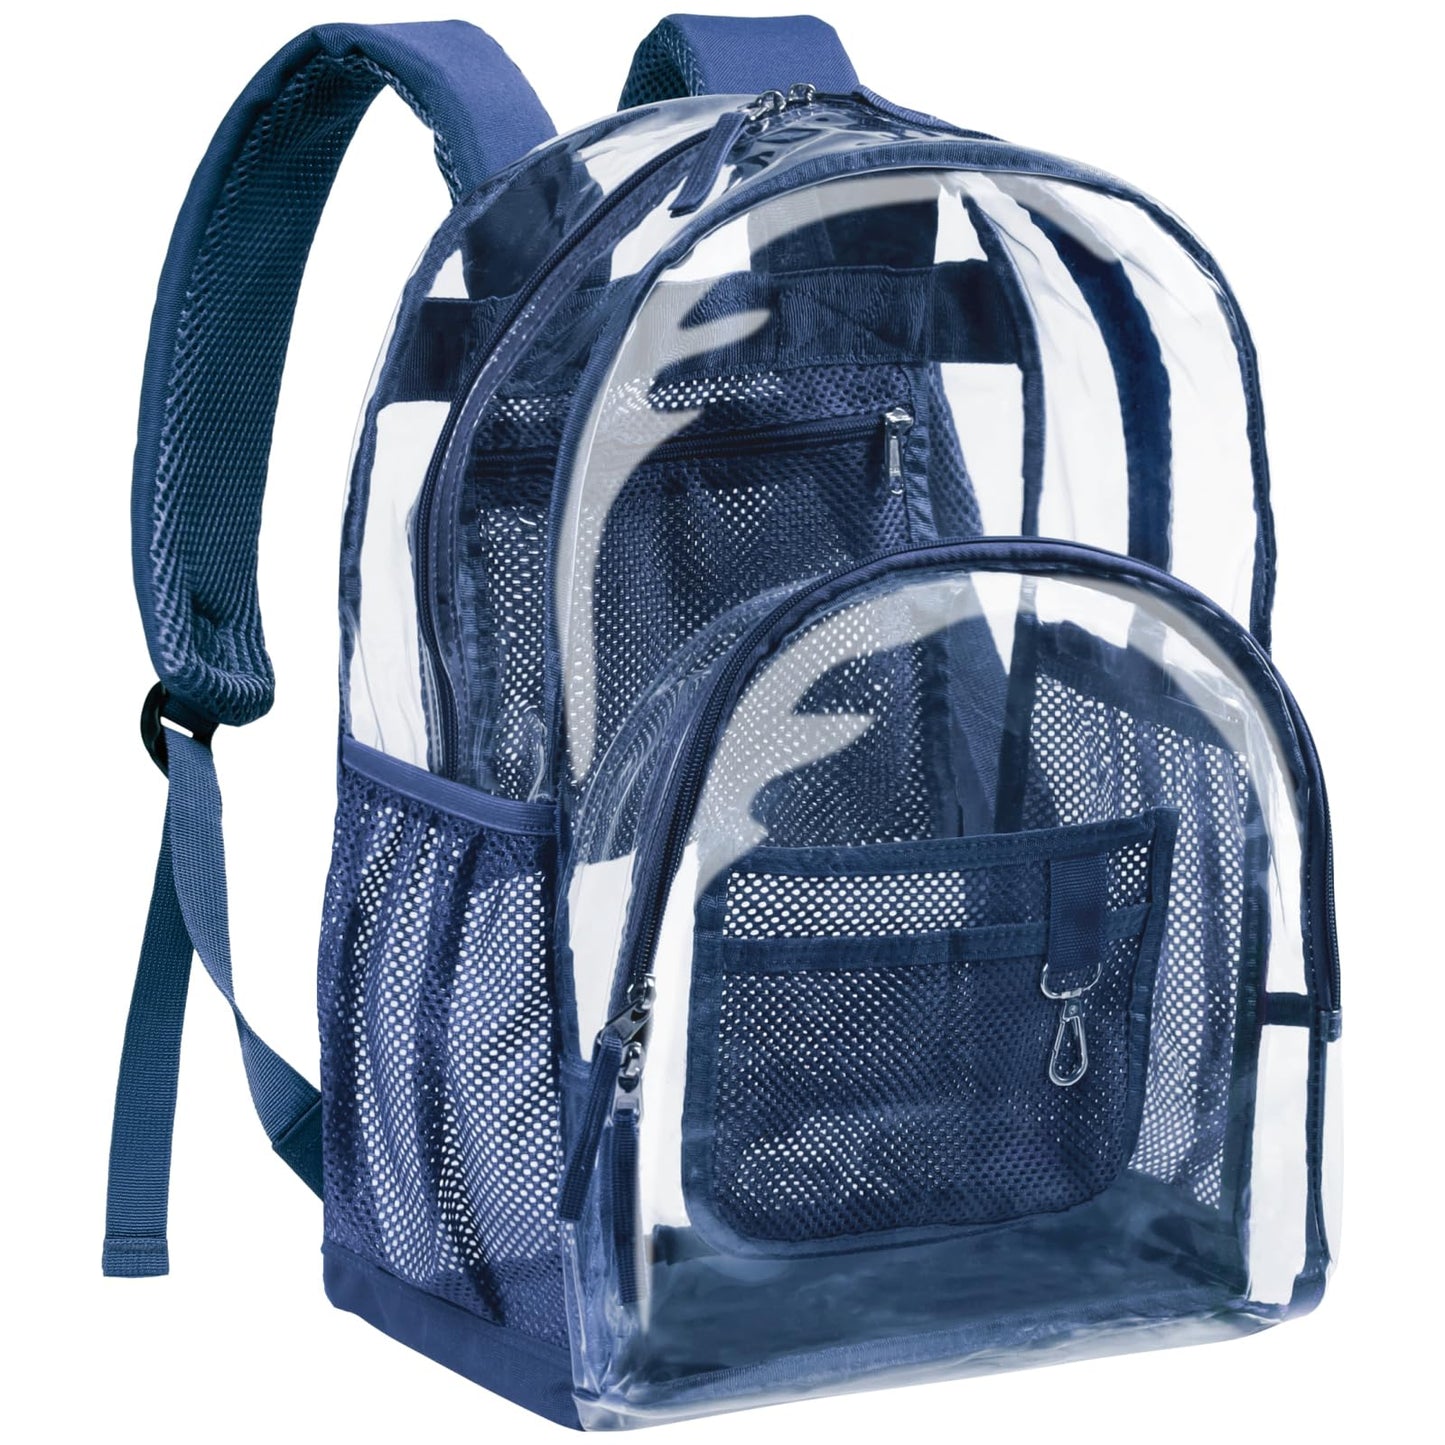 PACKISM Heavy Duty Clear School Backpack,X-Large